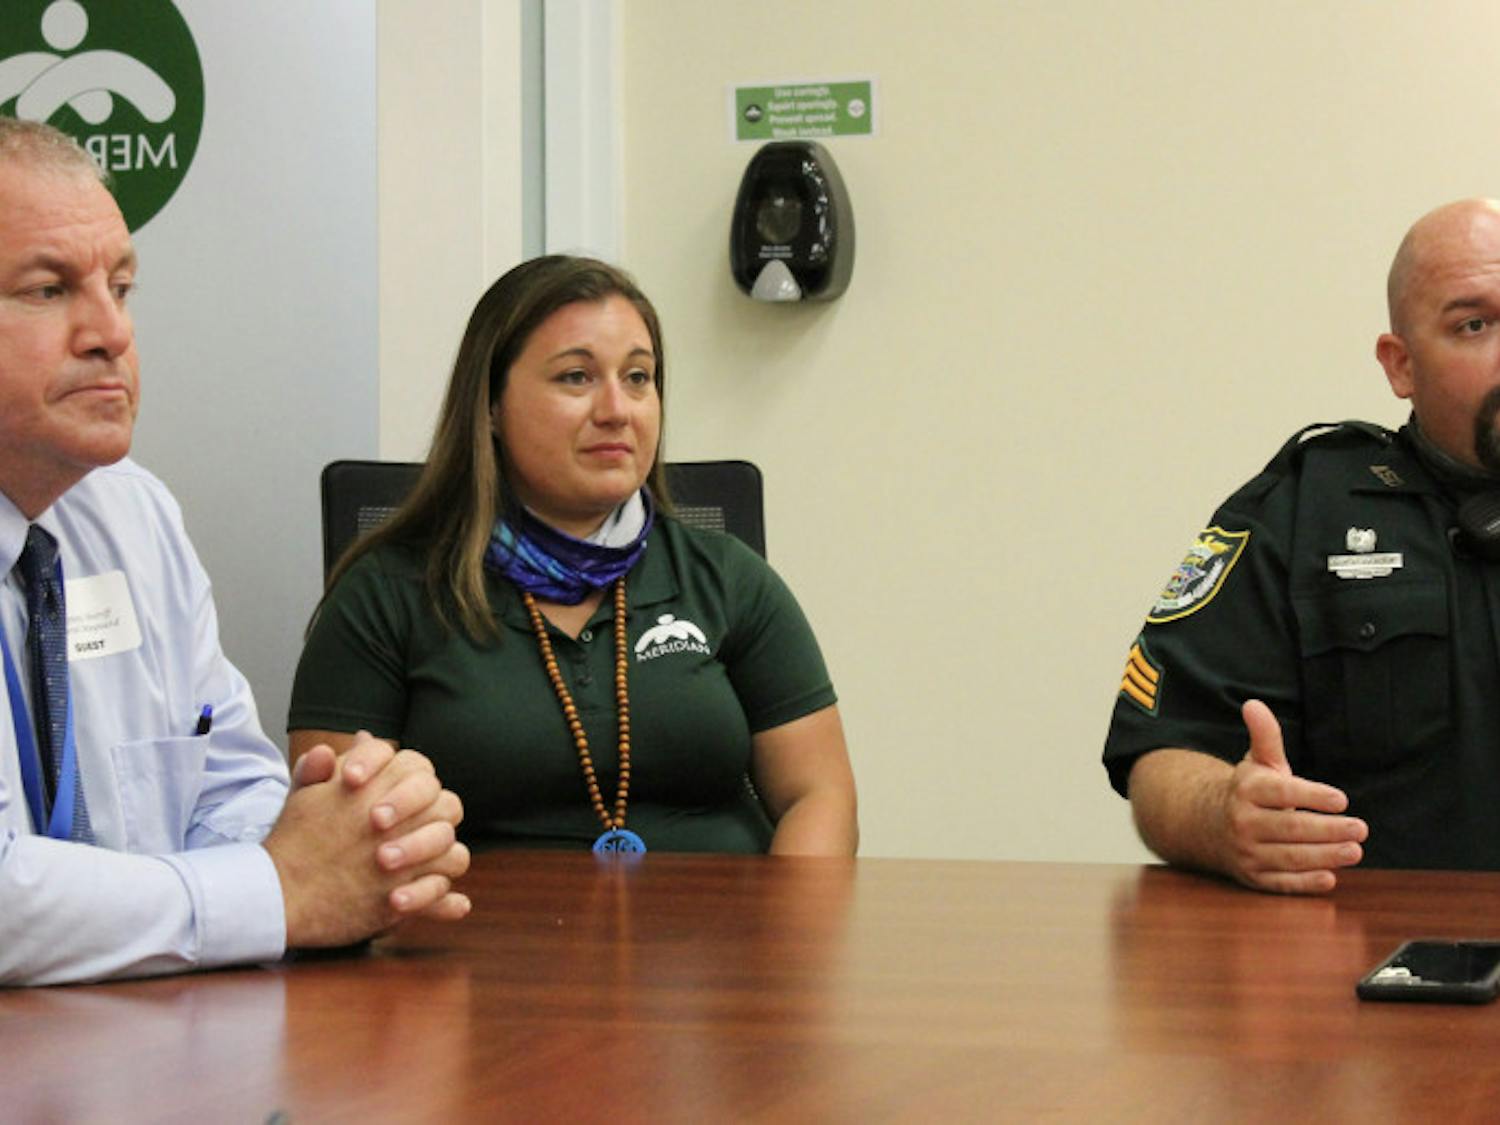 Sgt. Paul Pardue, supervisor of ACSO’s co-responder program (right), explains how Briana Kelley (middle) and Dan Maynard (left) will respond to mental health crises. Kelley is a mental health clinic specialist and Maynard is an ACSO deputy trained in crisis intervention.